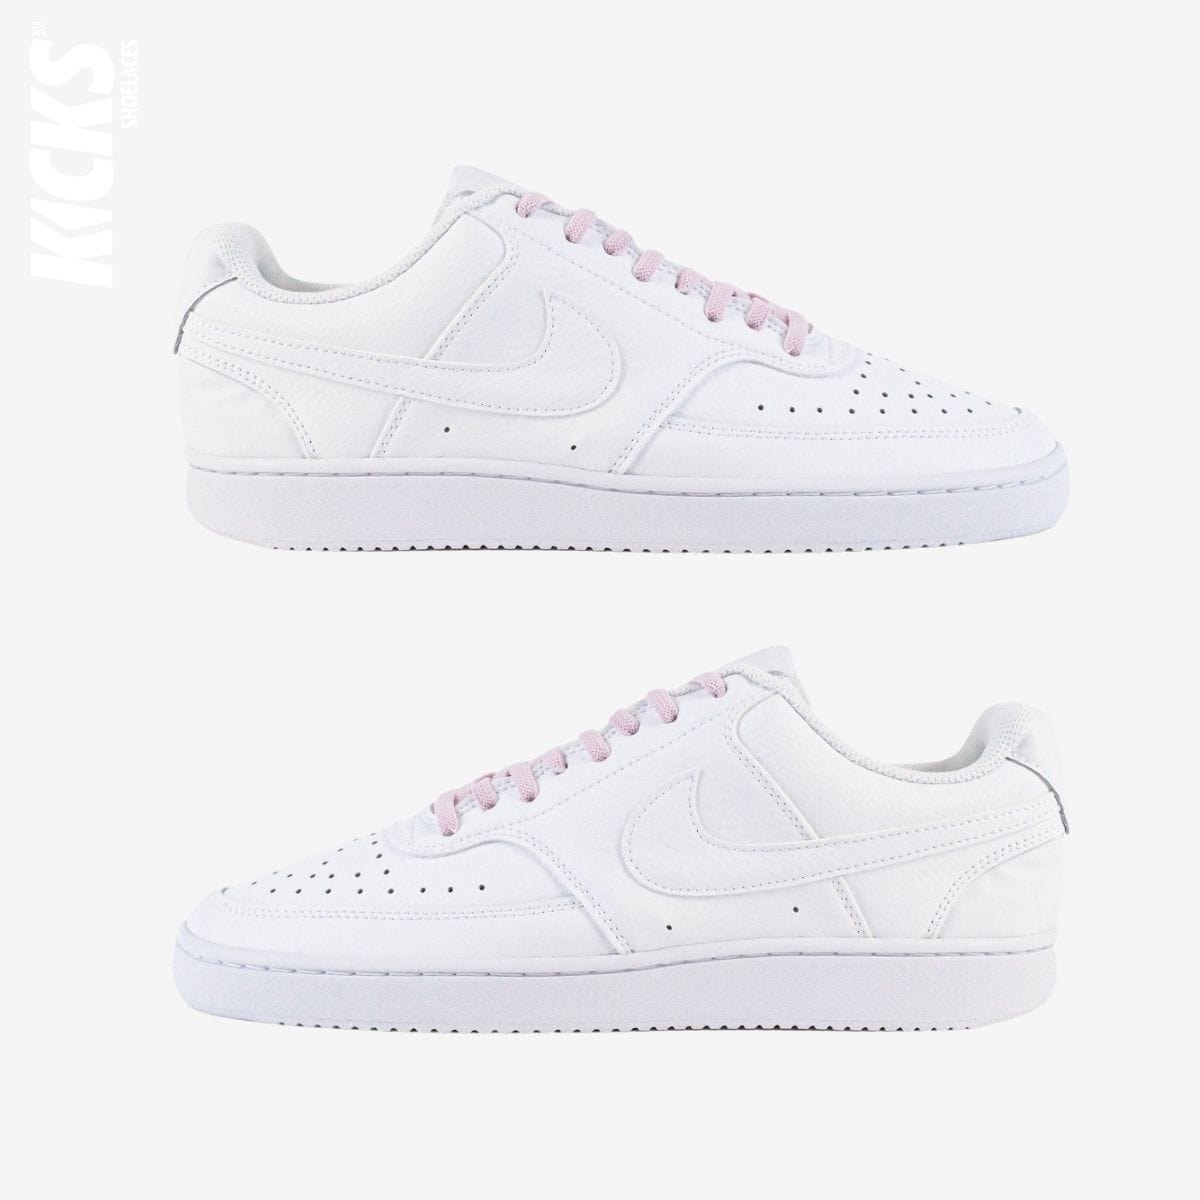 tieless-laces-with-pink-laces-on-nike-white-sneakers-by-kicks-shoelaces